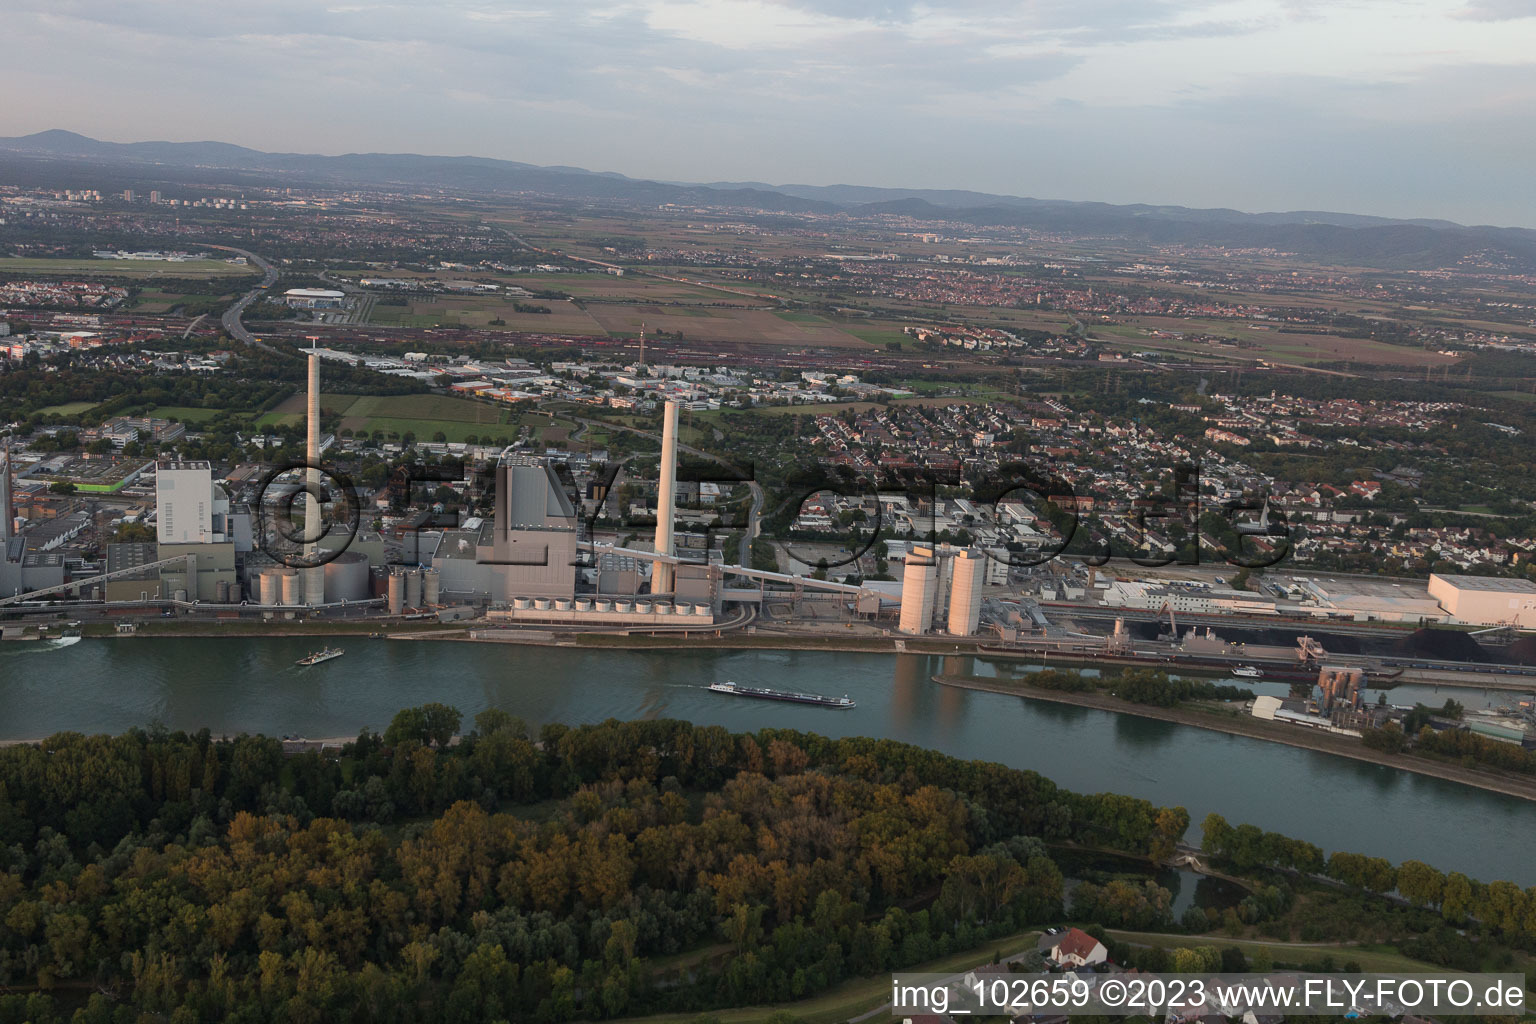 Aerial view of Large power plant Mannheim on the Rhine at Neckarau in the district Neckarau in Mannheim in the state Baden-Wuerttemberg, Germany